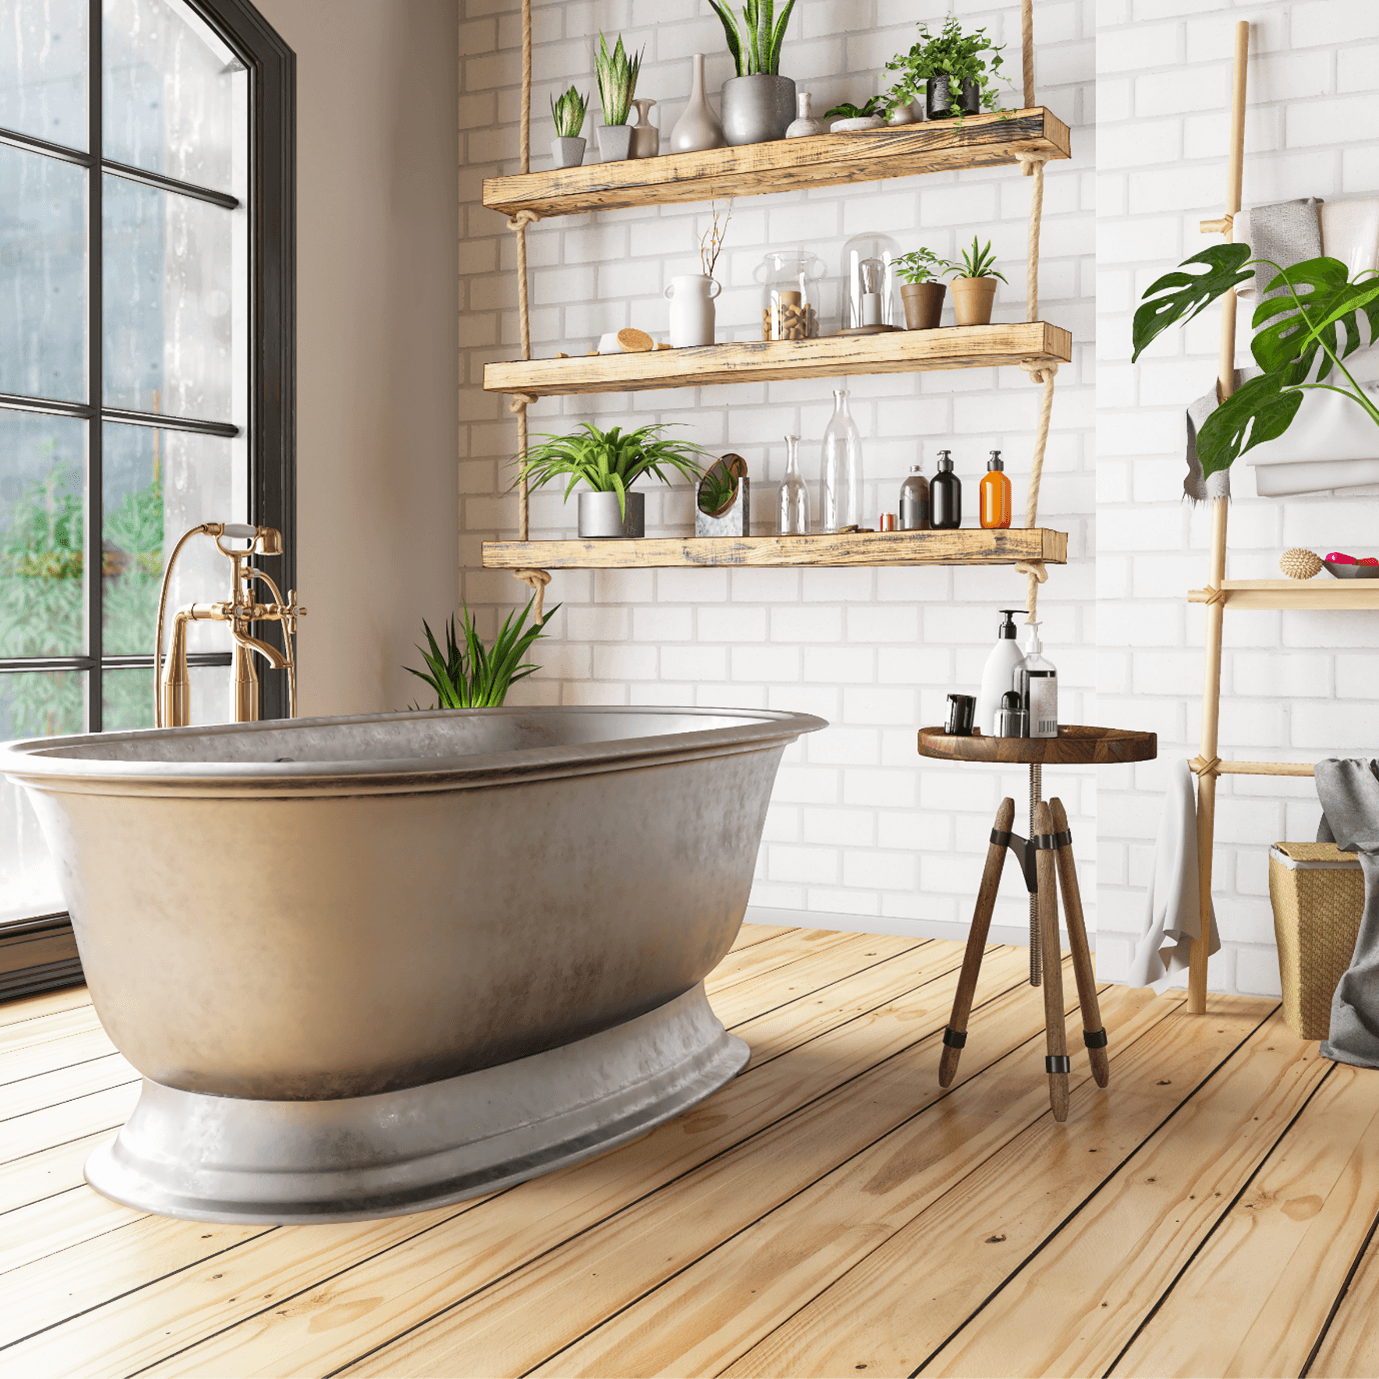 Smart Storage for Compact Bathrooms